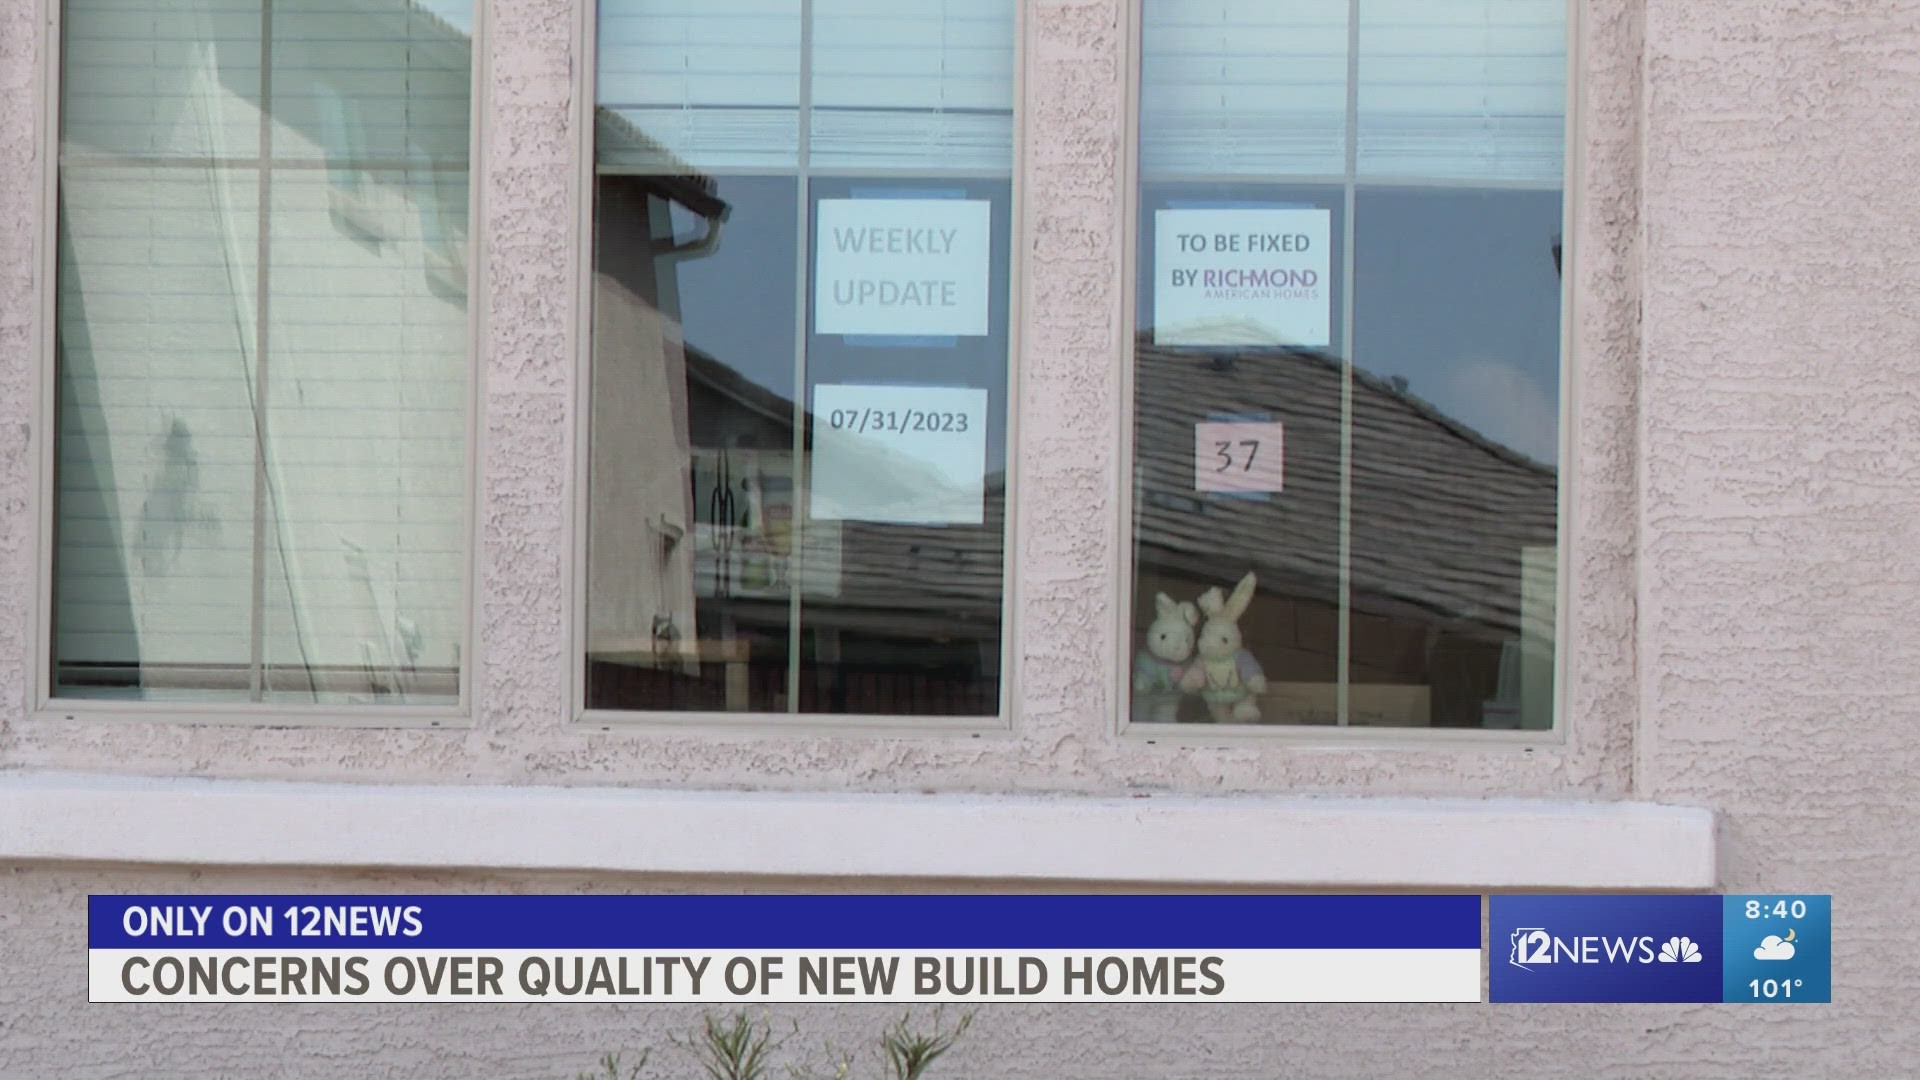 Arizona's Registrar of Contractors says they are seeing an uptick in complaints against new home builders. Residents in one Maricopa community have a list of issues.